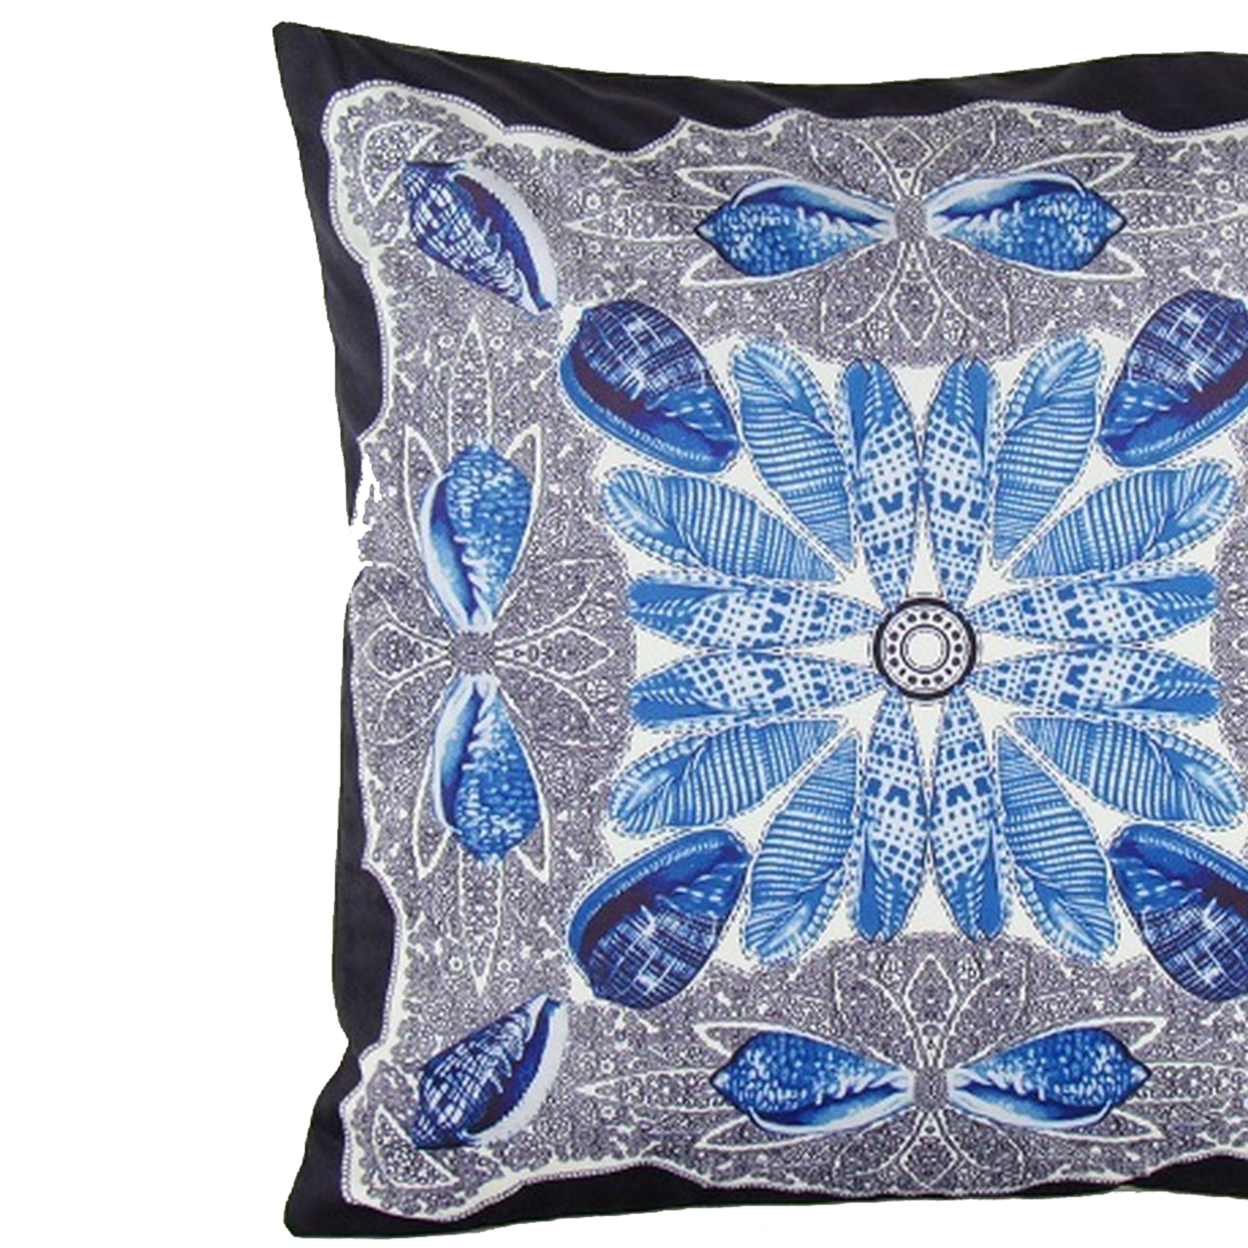 Square Fabric Pillow With Floral Pattern, Blue And Gray- Saltoro Sherpi